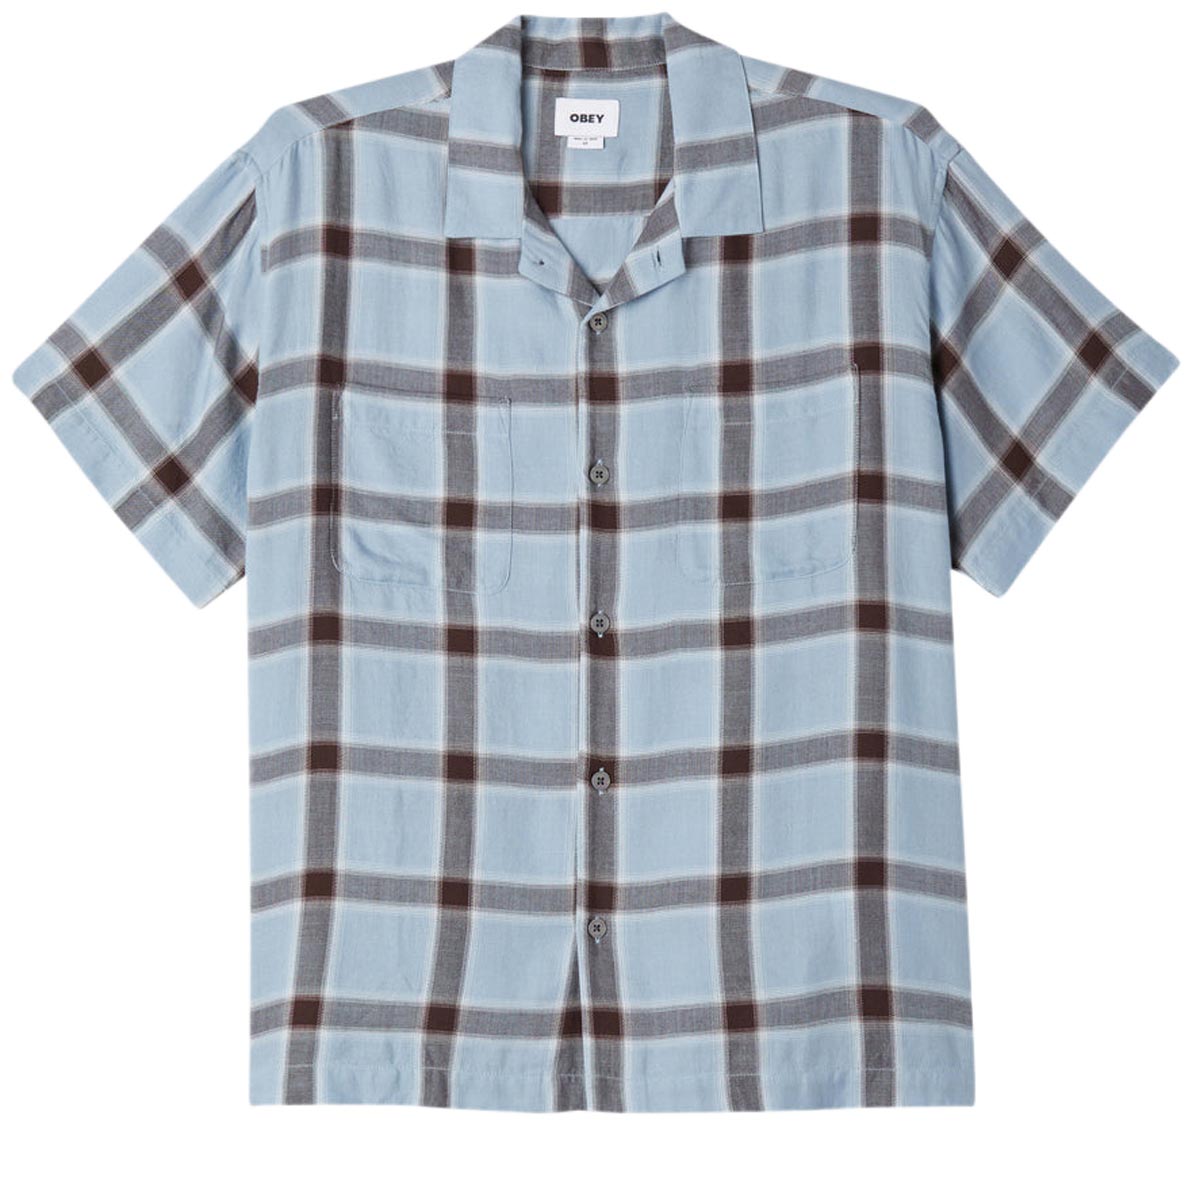 Obey Ambient Woven Shirt - Good Grey Multi image 1